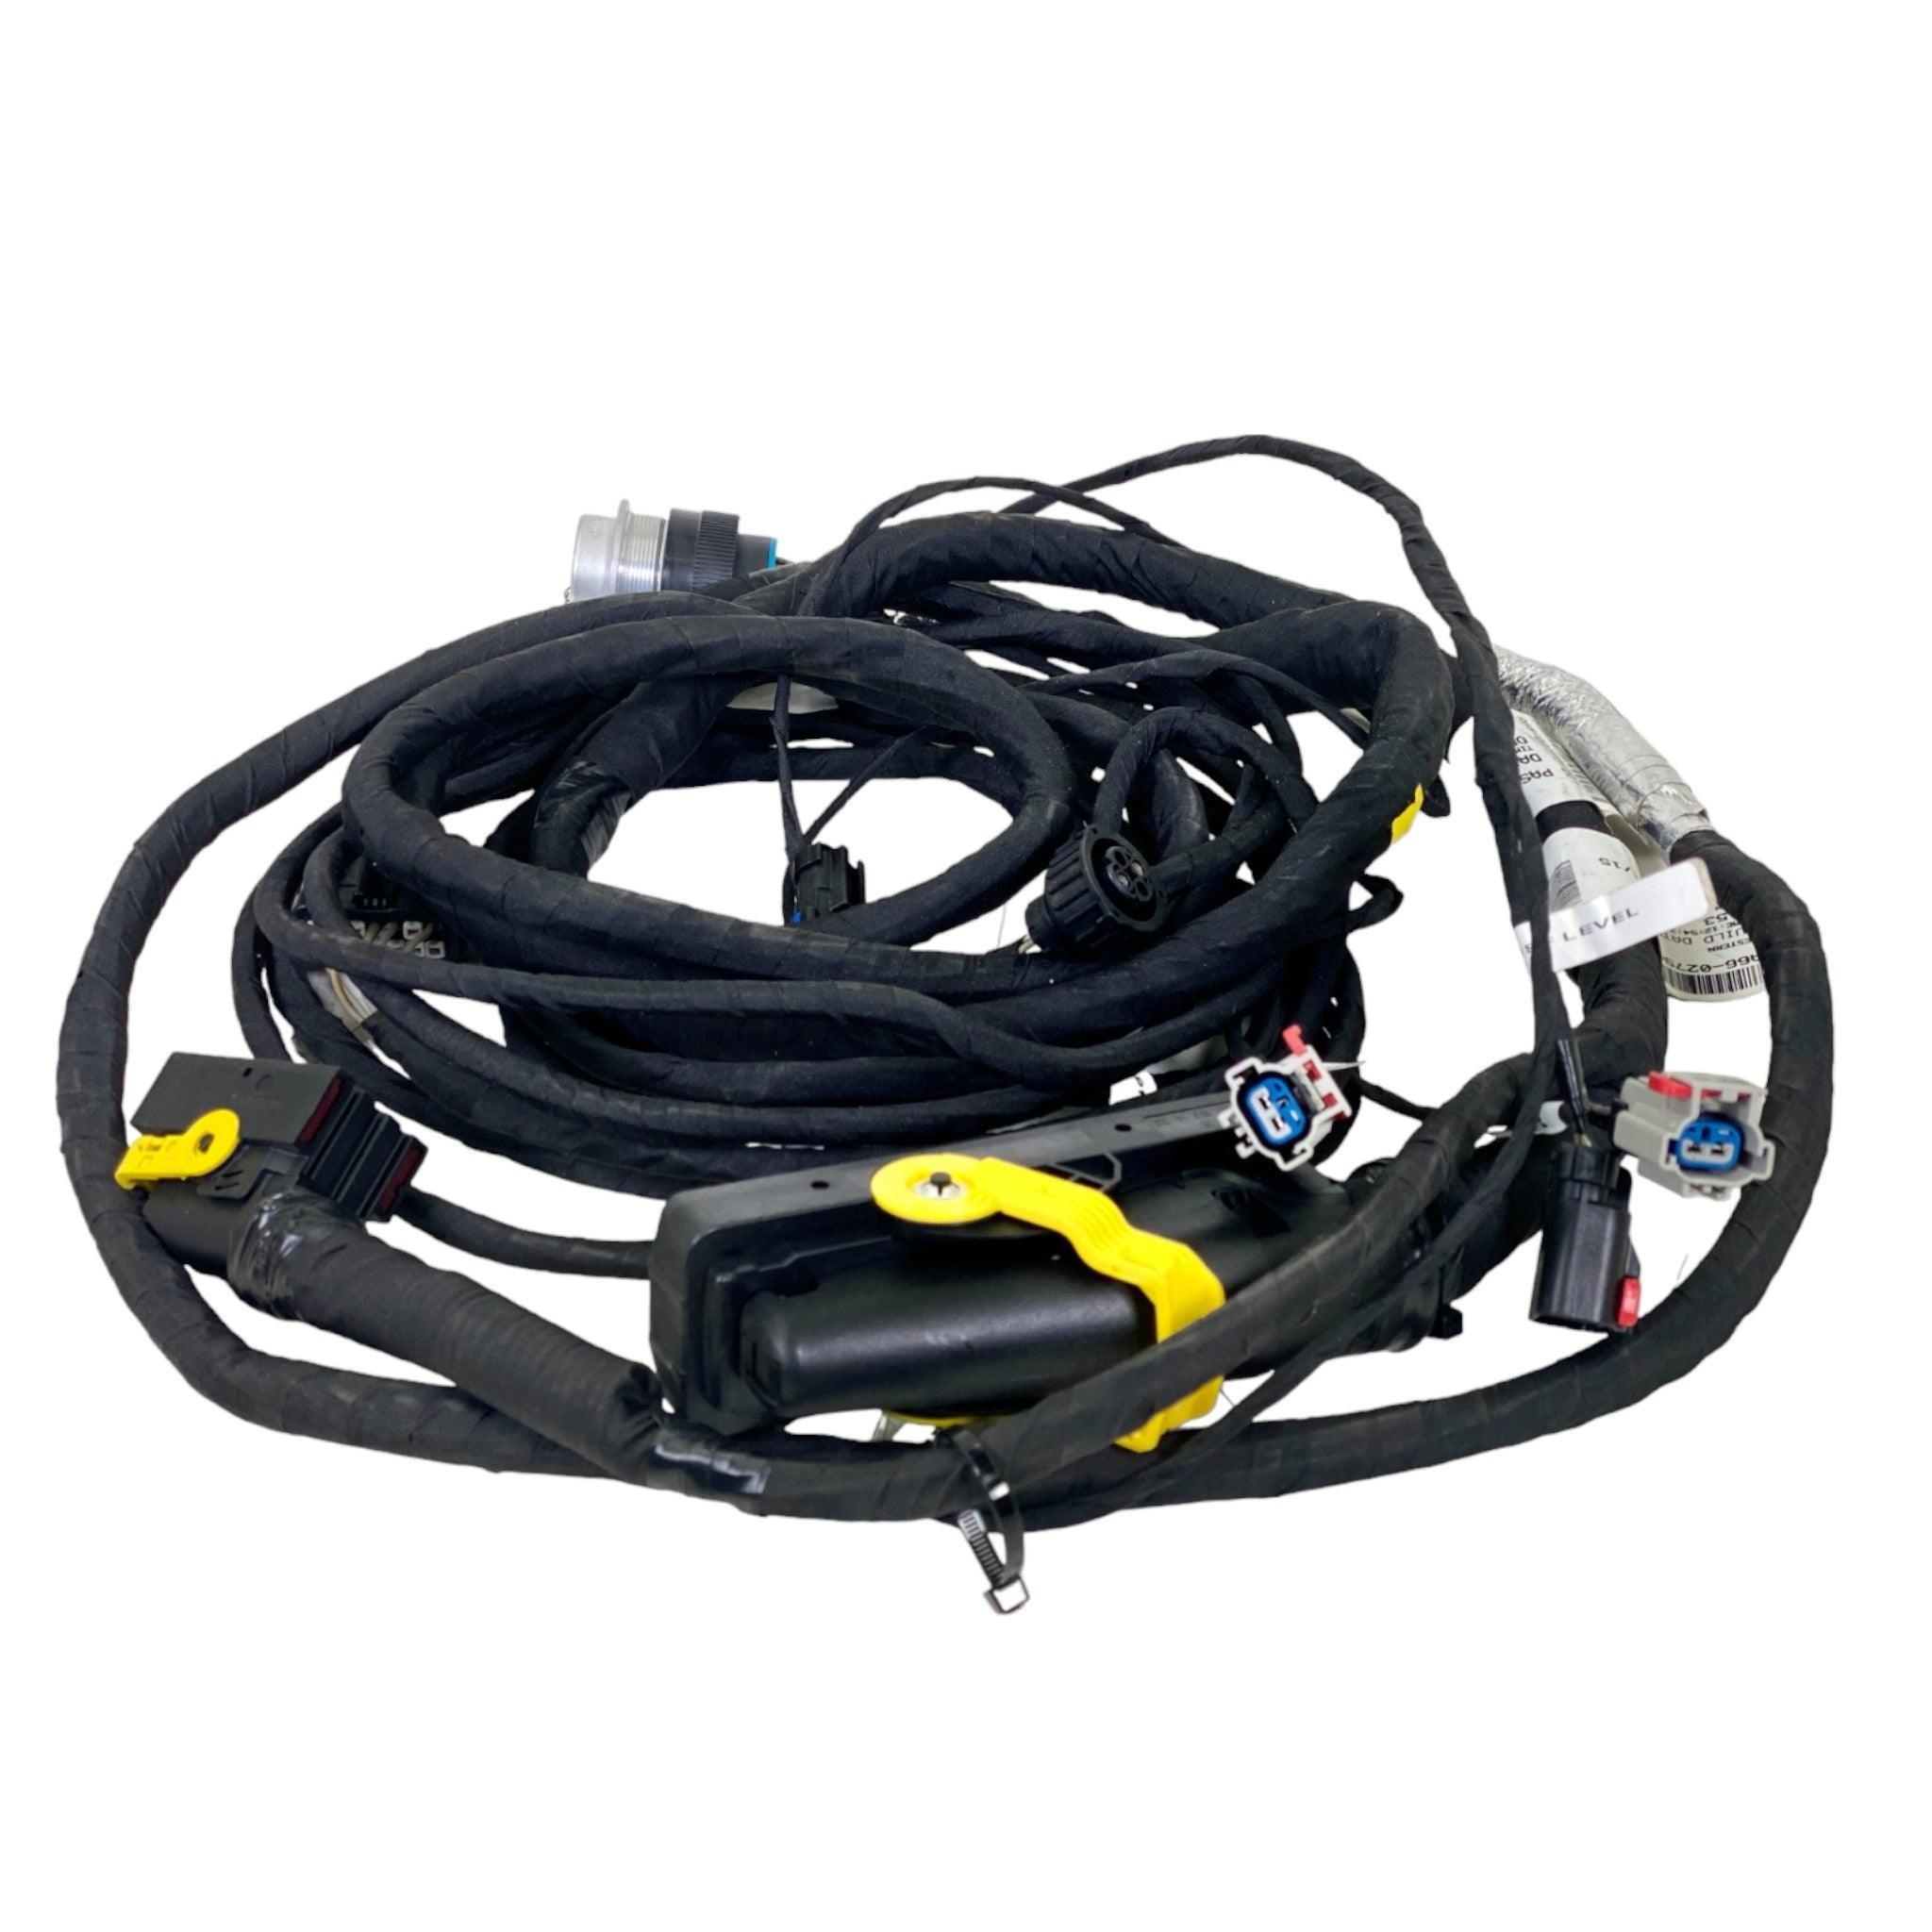 A06-91898-002 Genuine Freightliner® Kit Harness Ats - ADVANCED TRUCK PARTS